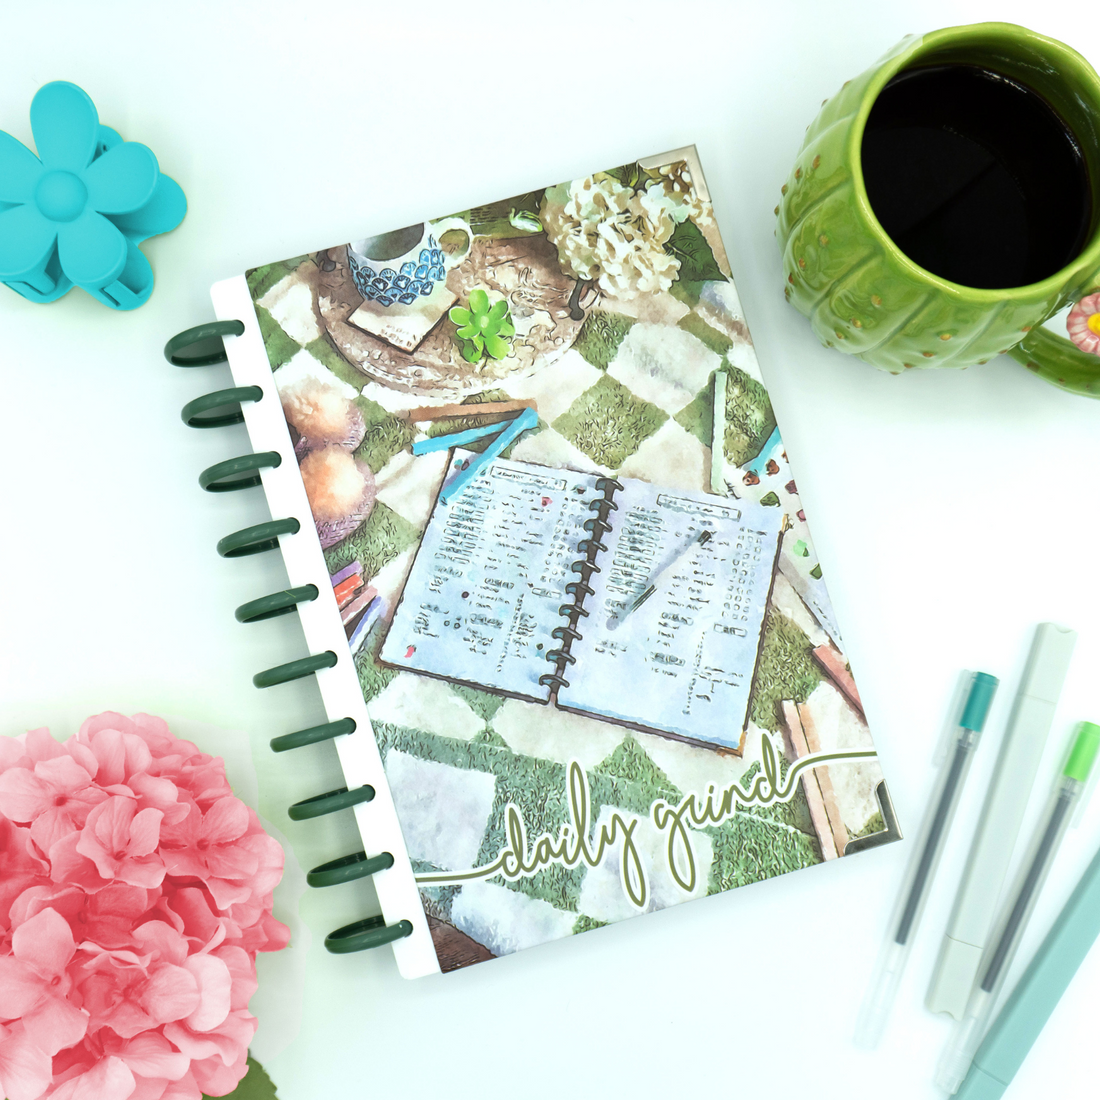 Clip-in Daily Grind Planner Cover | Picnic Vibes